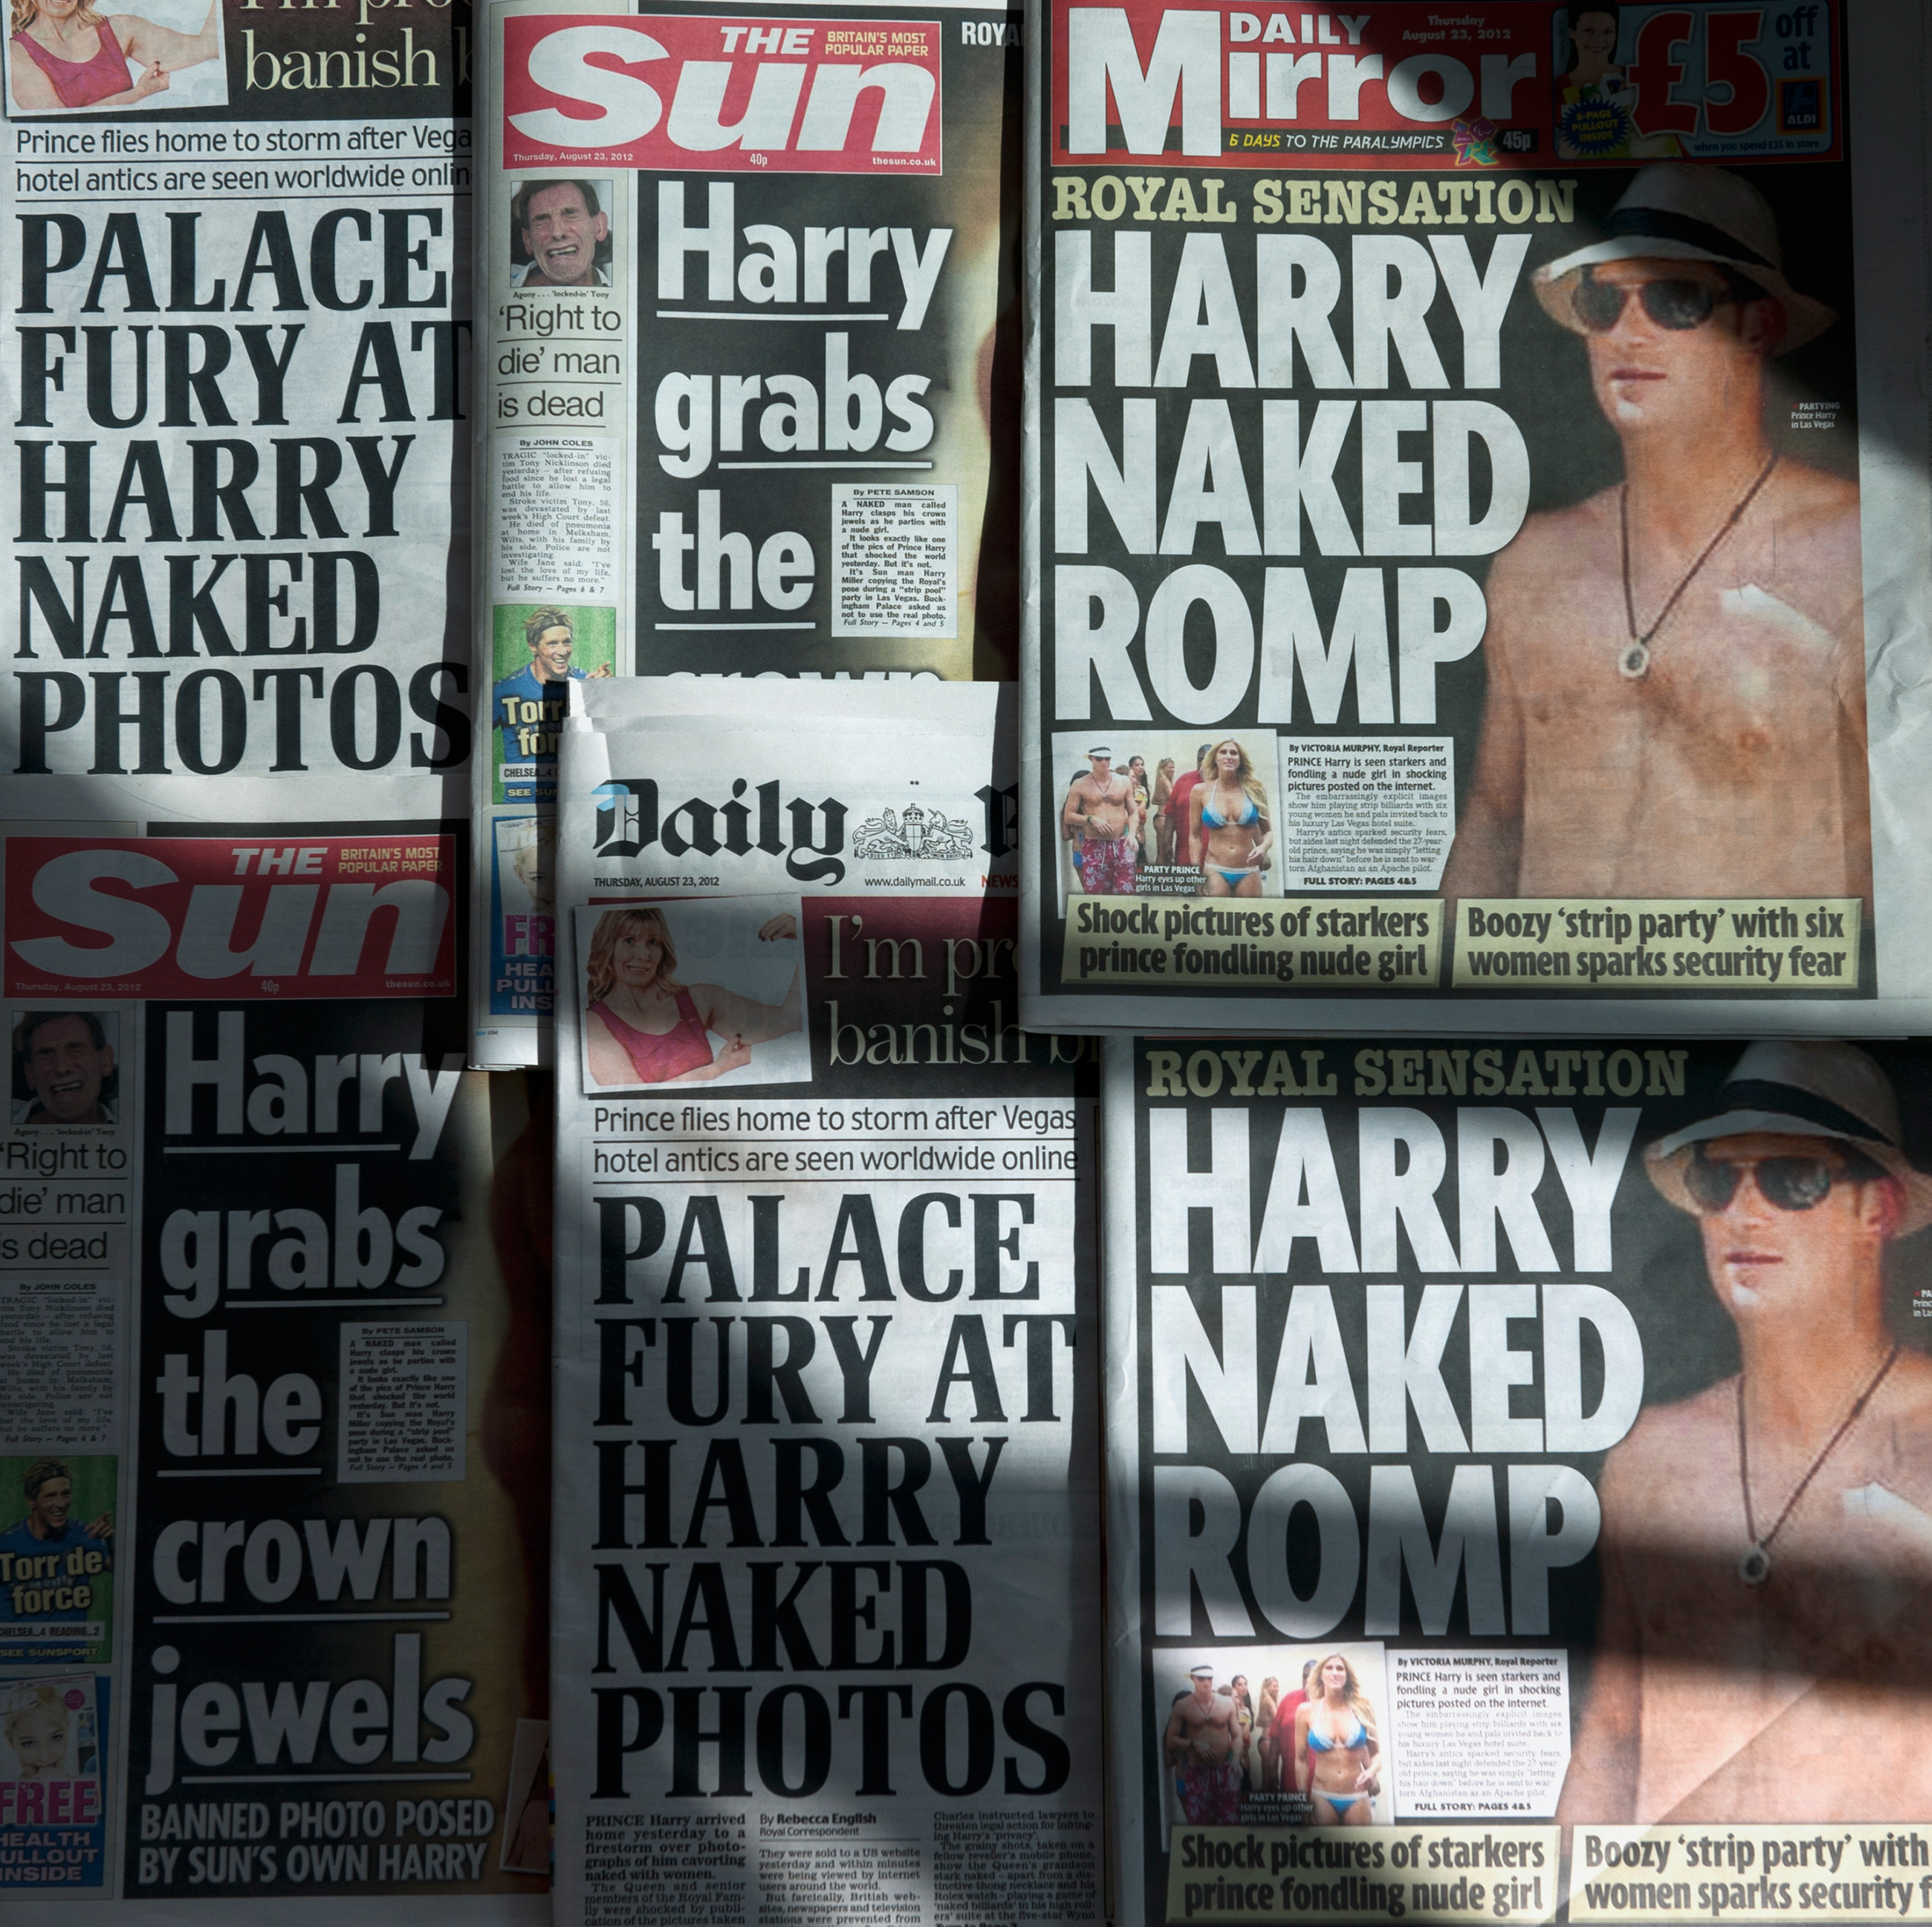 An arrangment of British daily newspapers photographed in London on August 23, 2012 shows the front-page headlines and stories regarding nude pictures of Britain's Prince Harry. Daniel Sorabj—AFP/Getty Images. (Daniel Sorabj—AFP/Getty Images.)